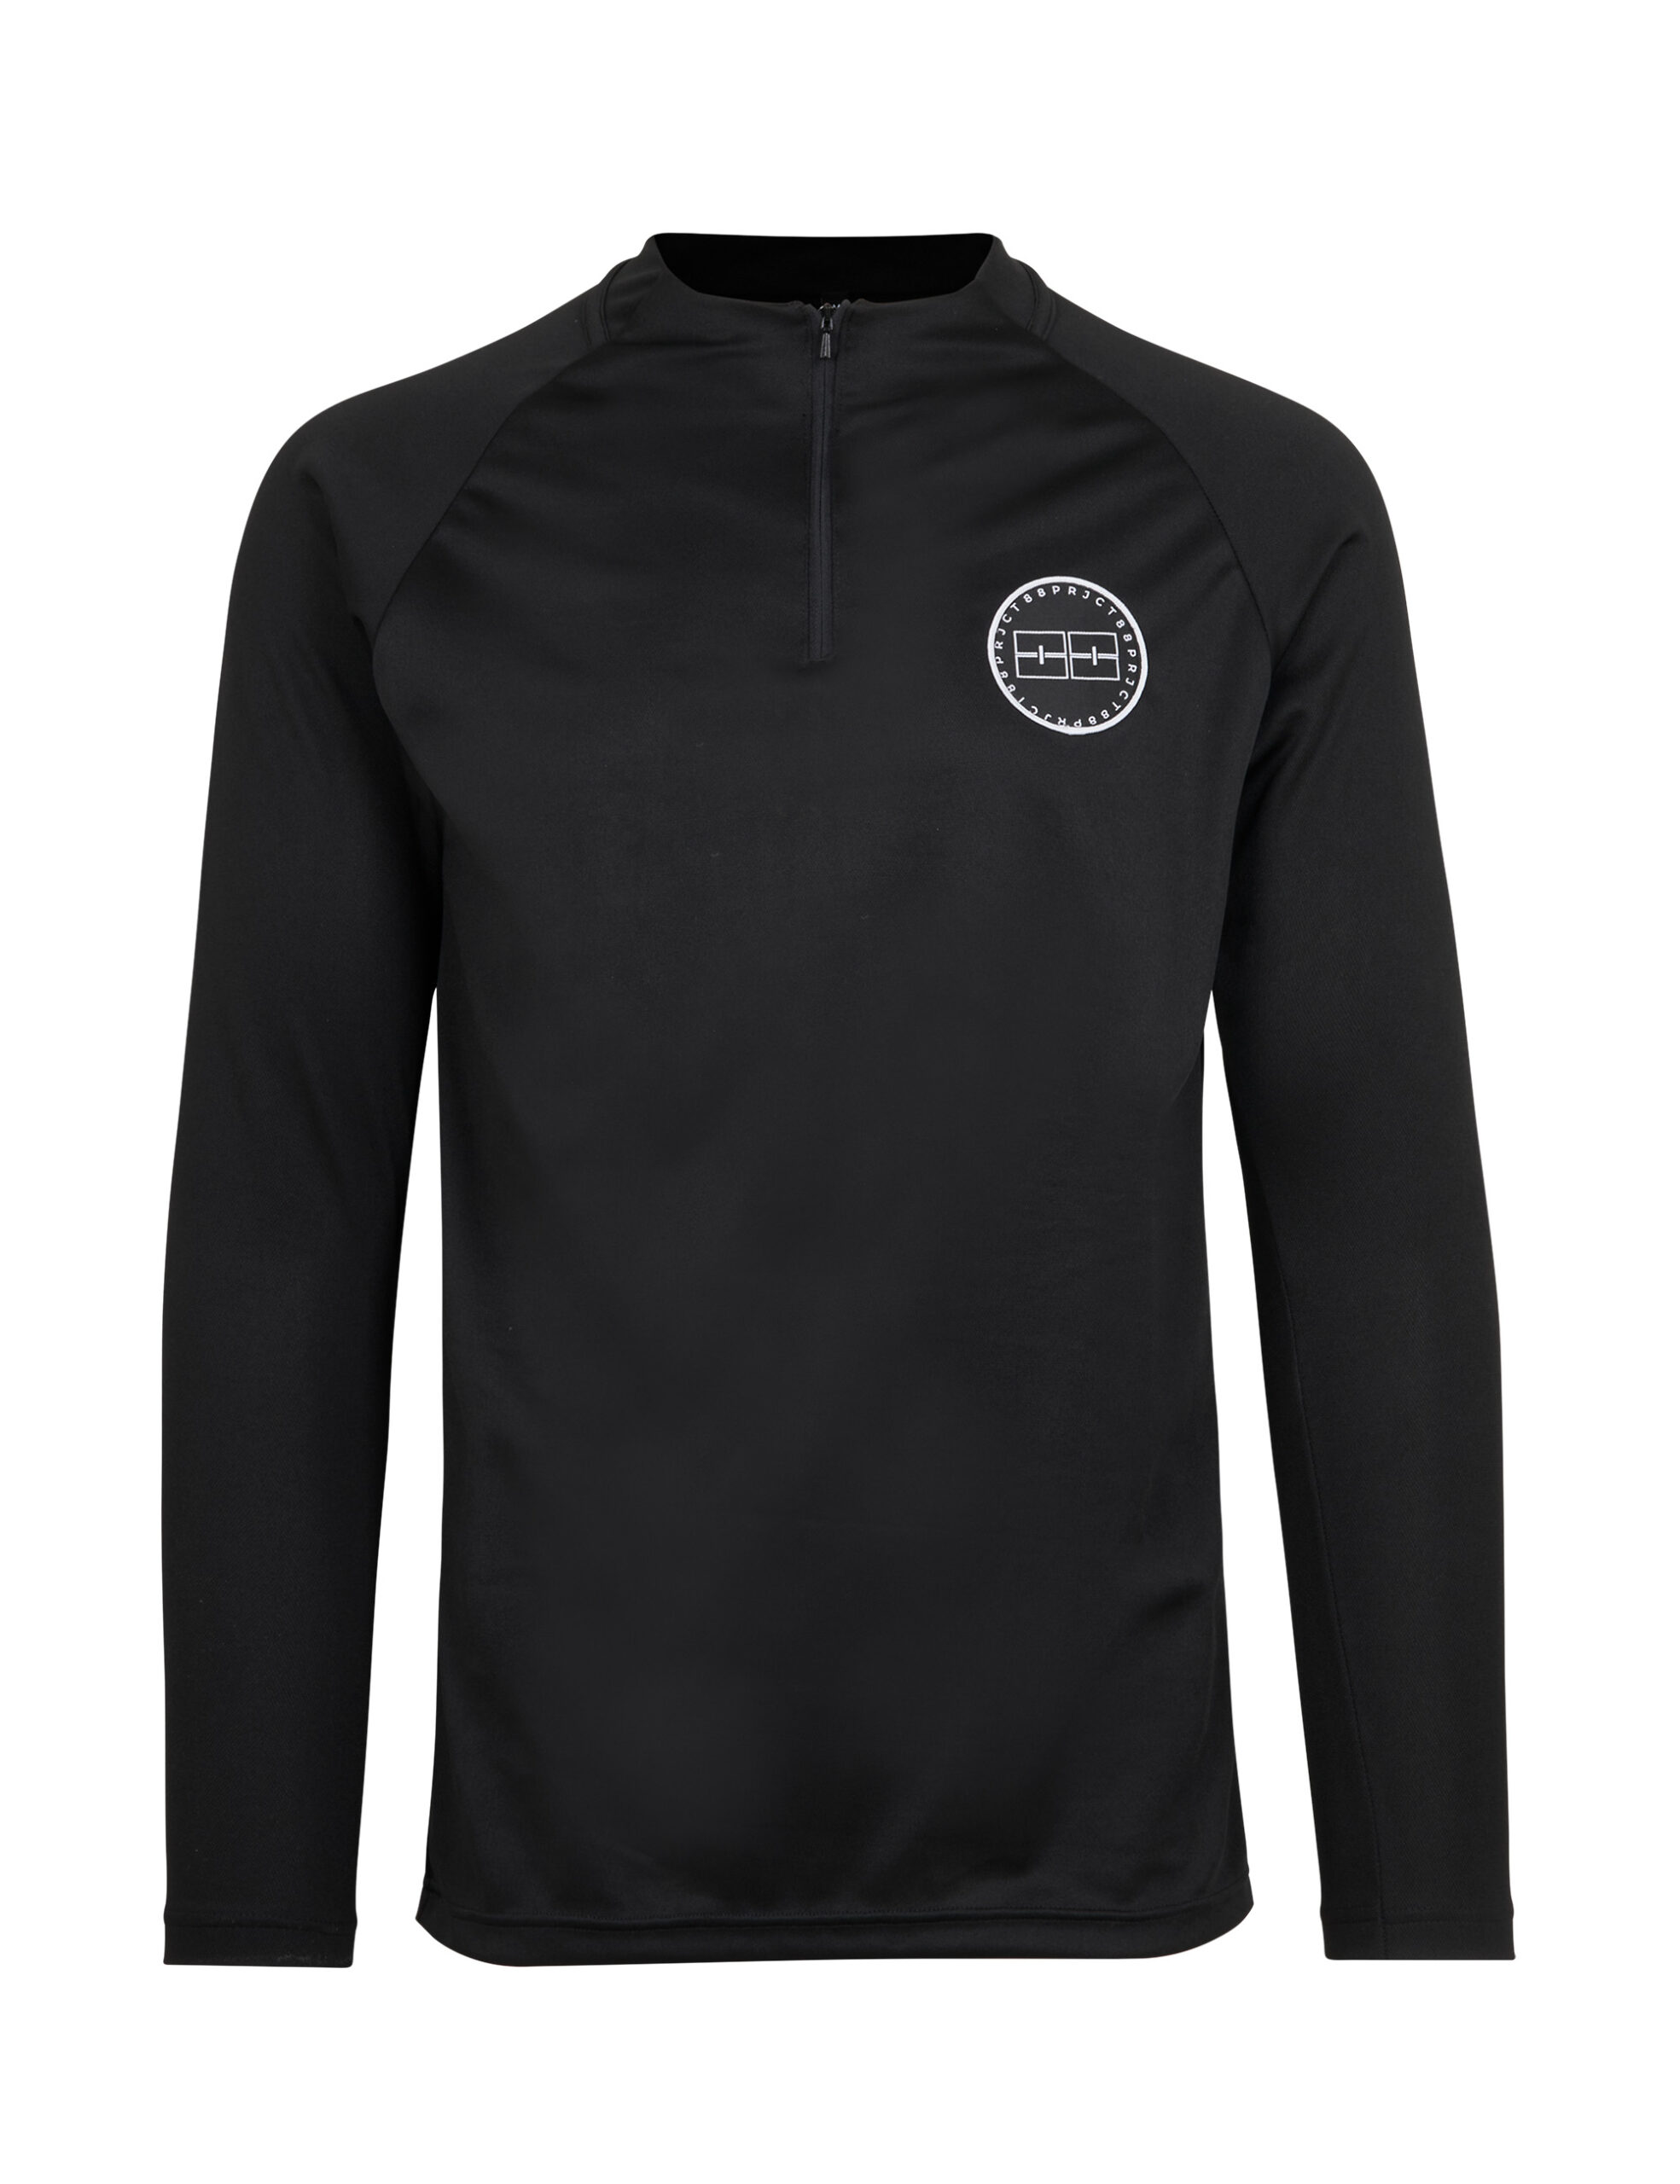 ?LOGO COLLECTION? Long Sleeve Sports Top With Chest Logo   ? Black